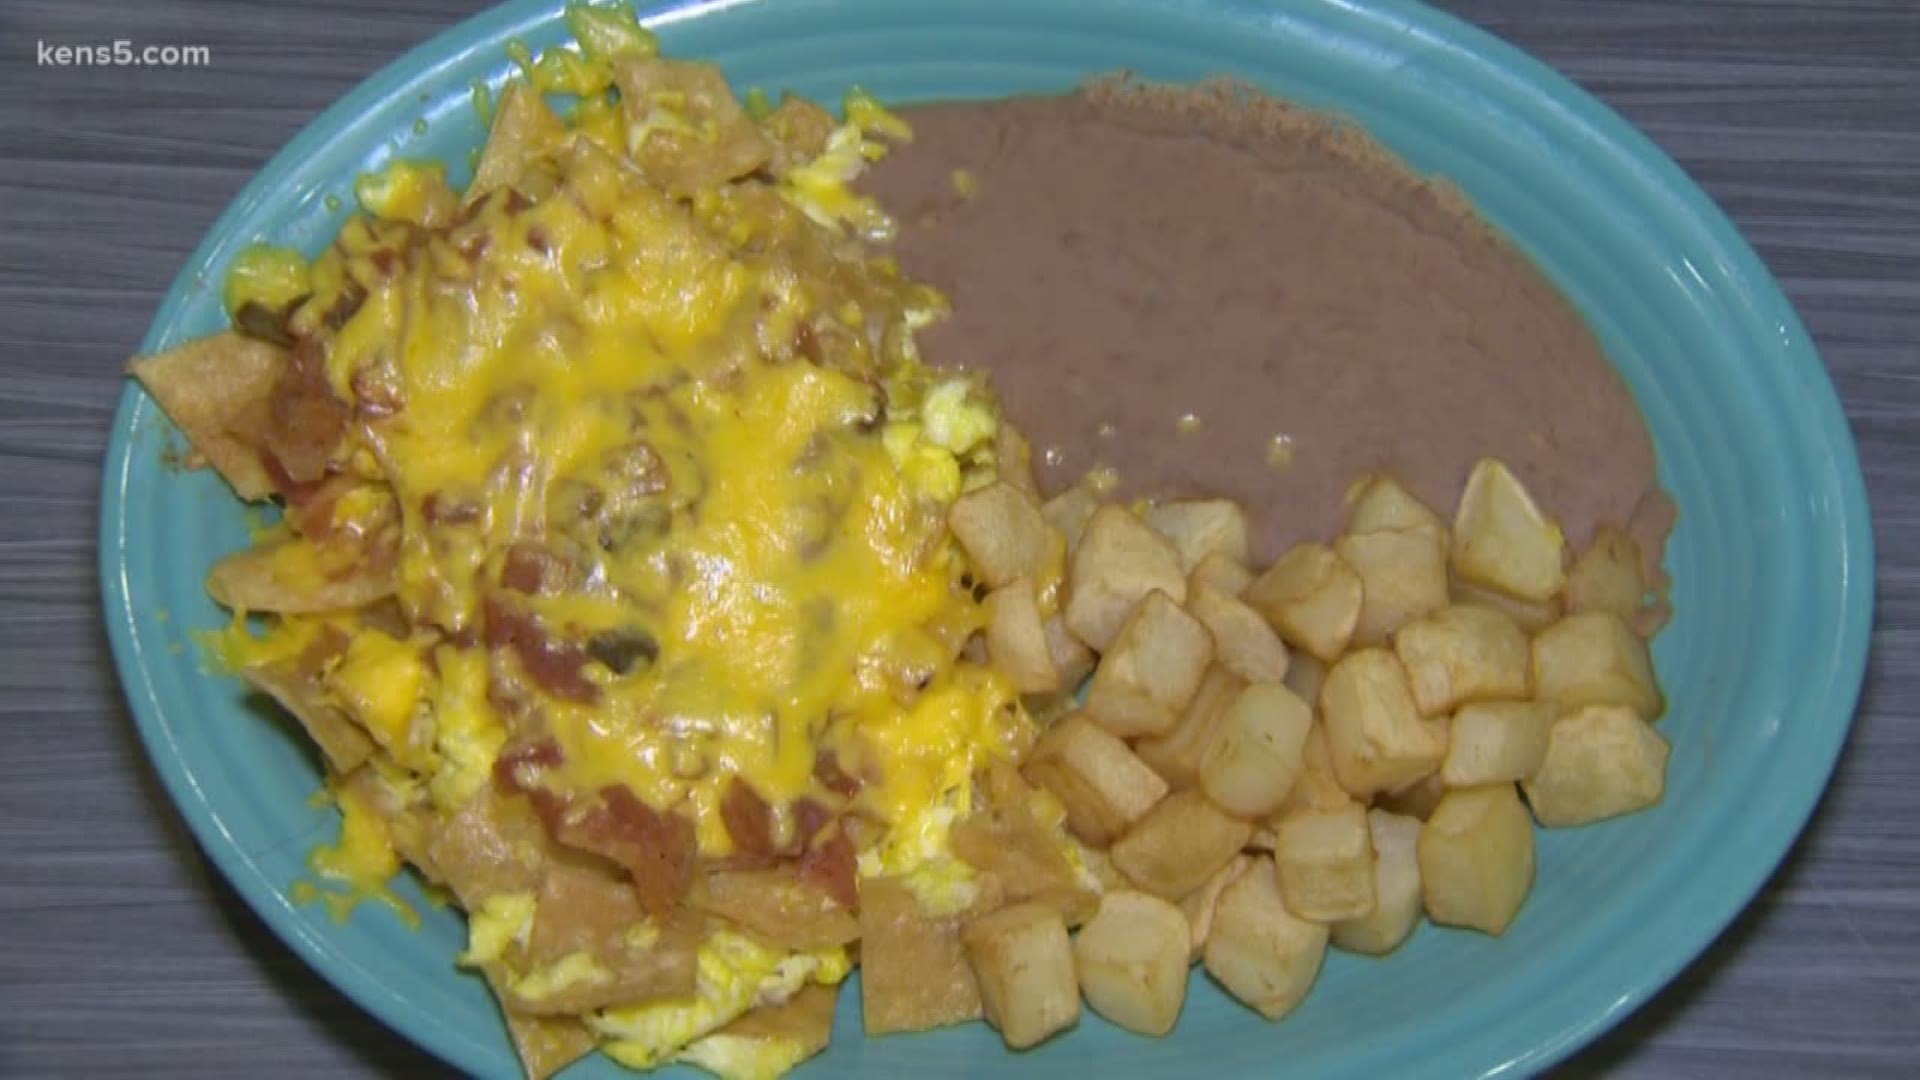 Neighborhood Eats is grubbing on Tex-Mex and authentic Mexican food this morning. Marvin ran out the door when heard about the son of two restaurant owners who's cooking up his own dream.